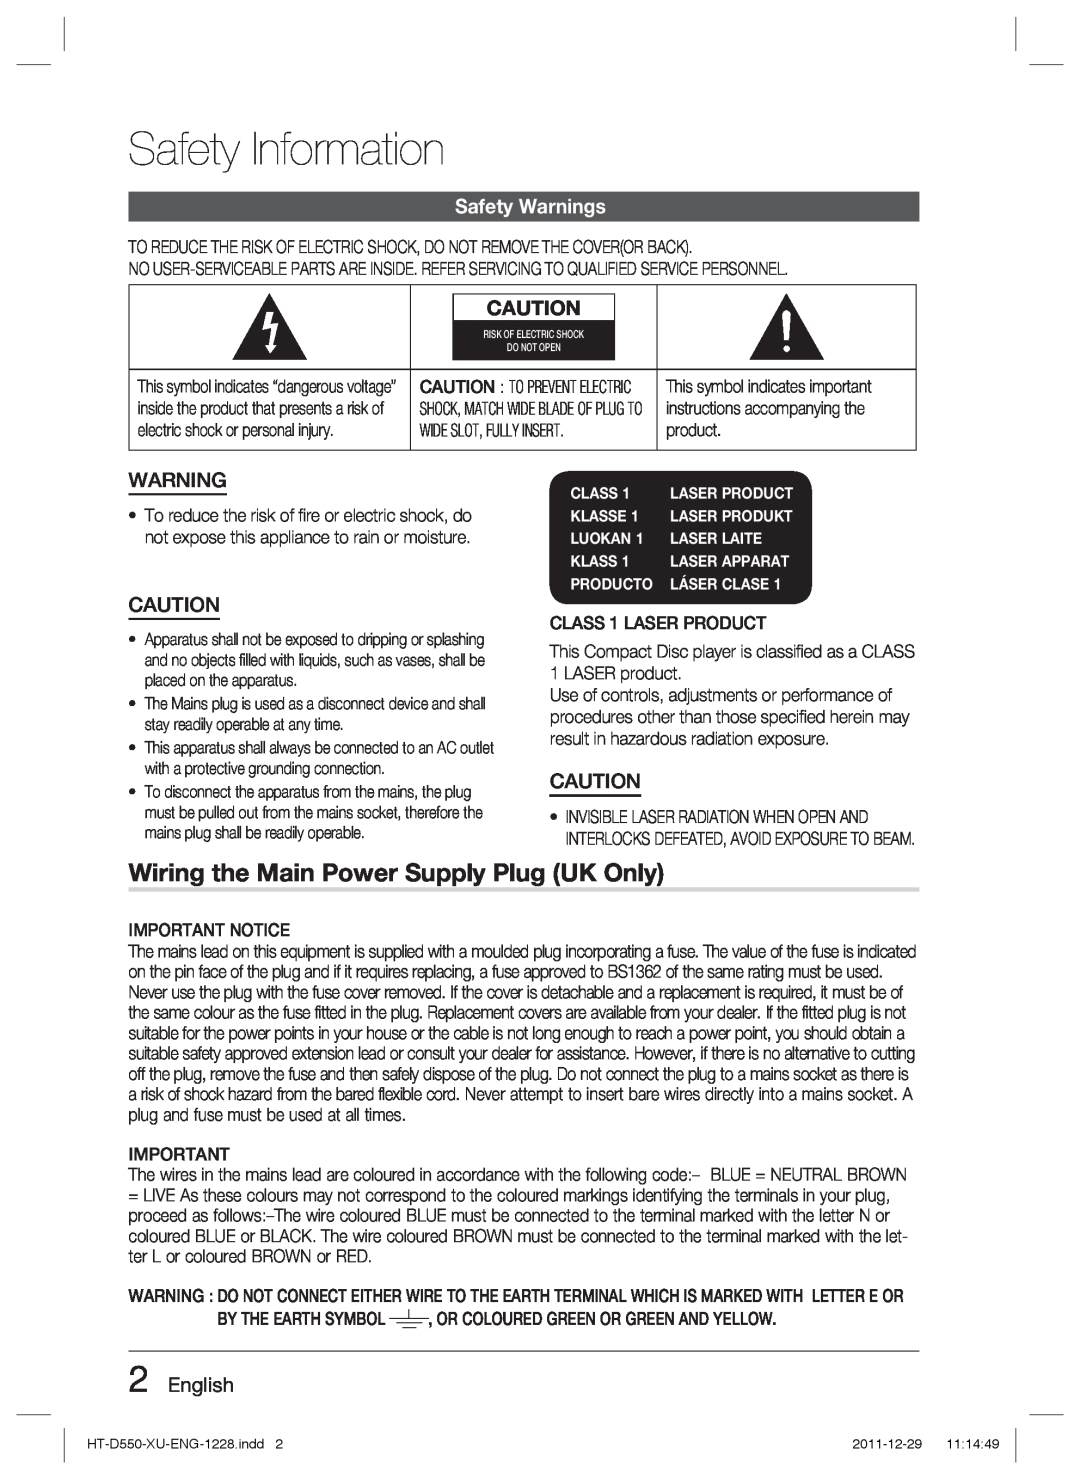 Samsung HT-D550/EN, HT-D550/XN Safety Information, Wiring the Main Power Supply Plug UK Only, Safety Warnings, English 